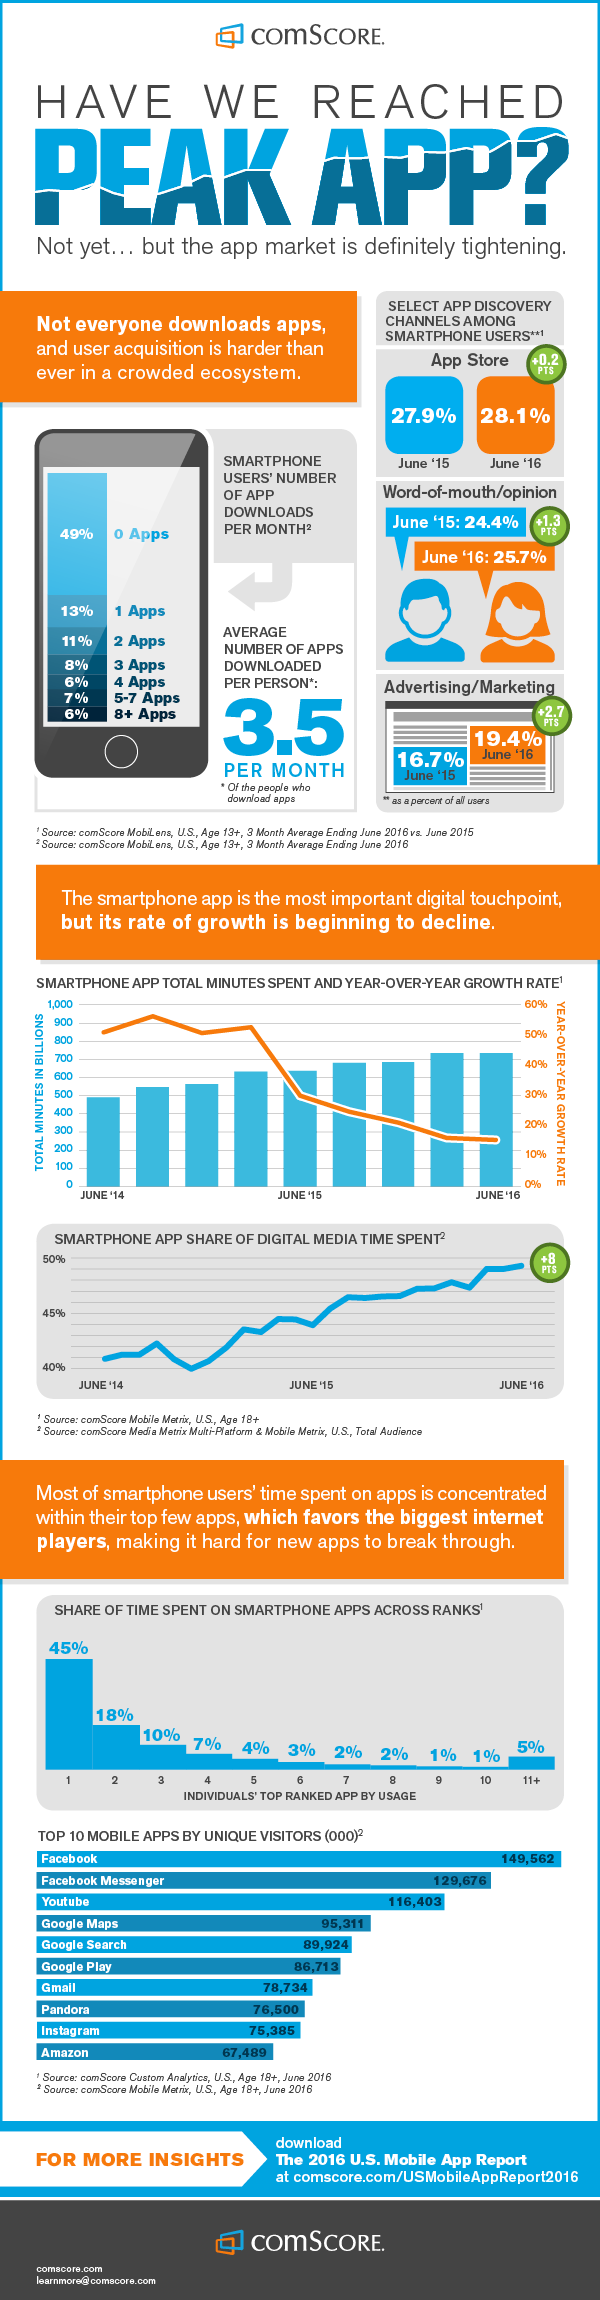 Is the Mobile App Market Already Dead? comScore Says We’re Nearing “Peak App” Moment